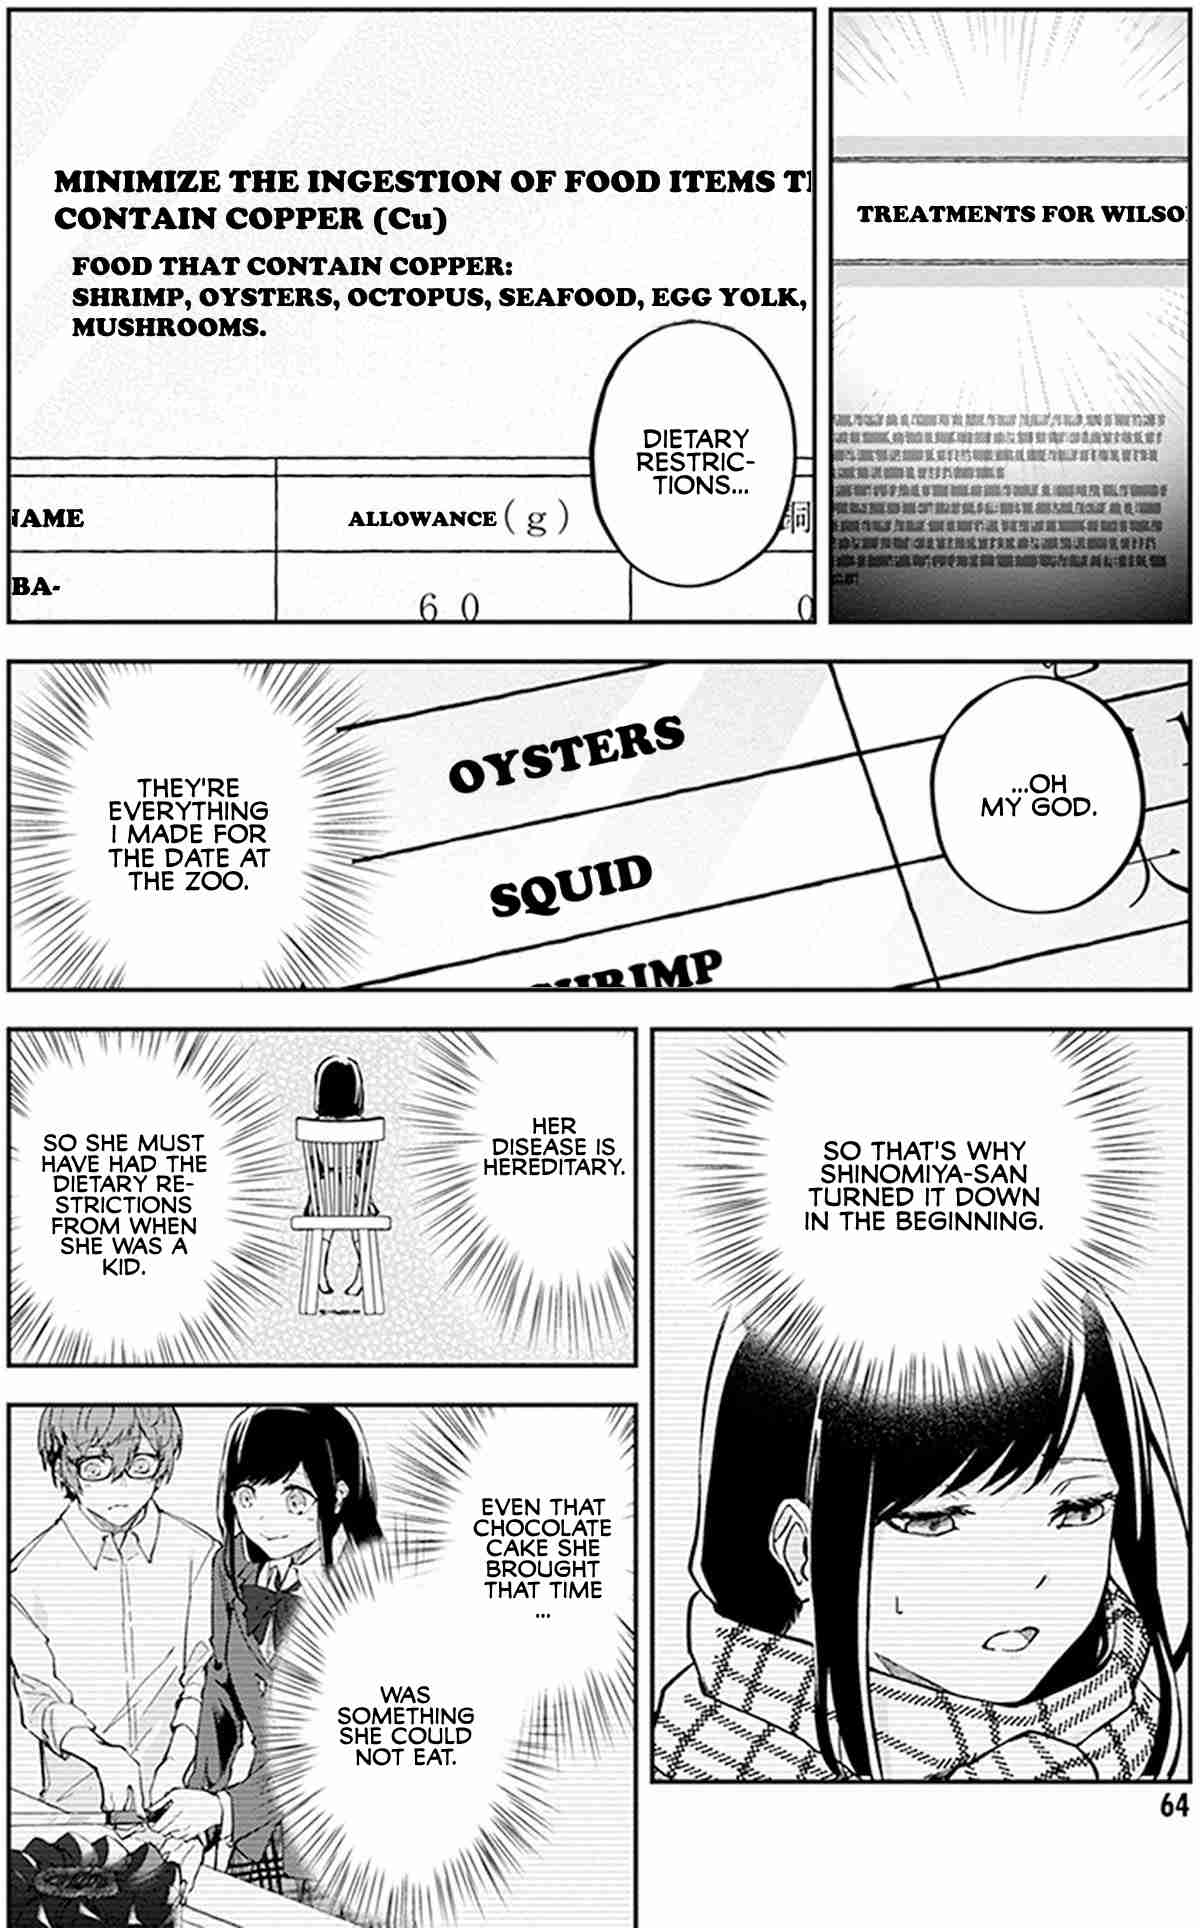 Hatsukoi Losstime Vol. 2 Ch. 7 I Hear the Ticking of Time, Part 1